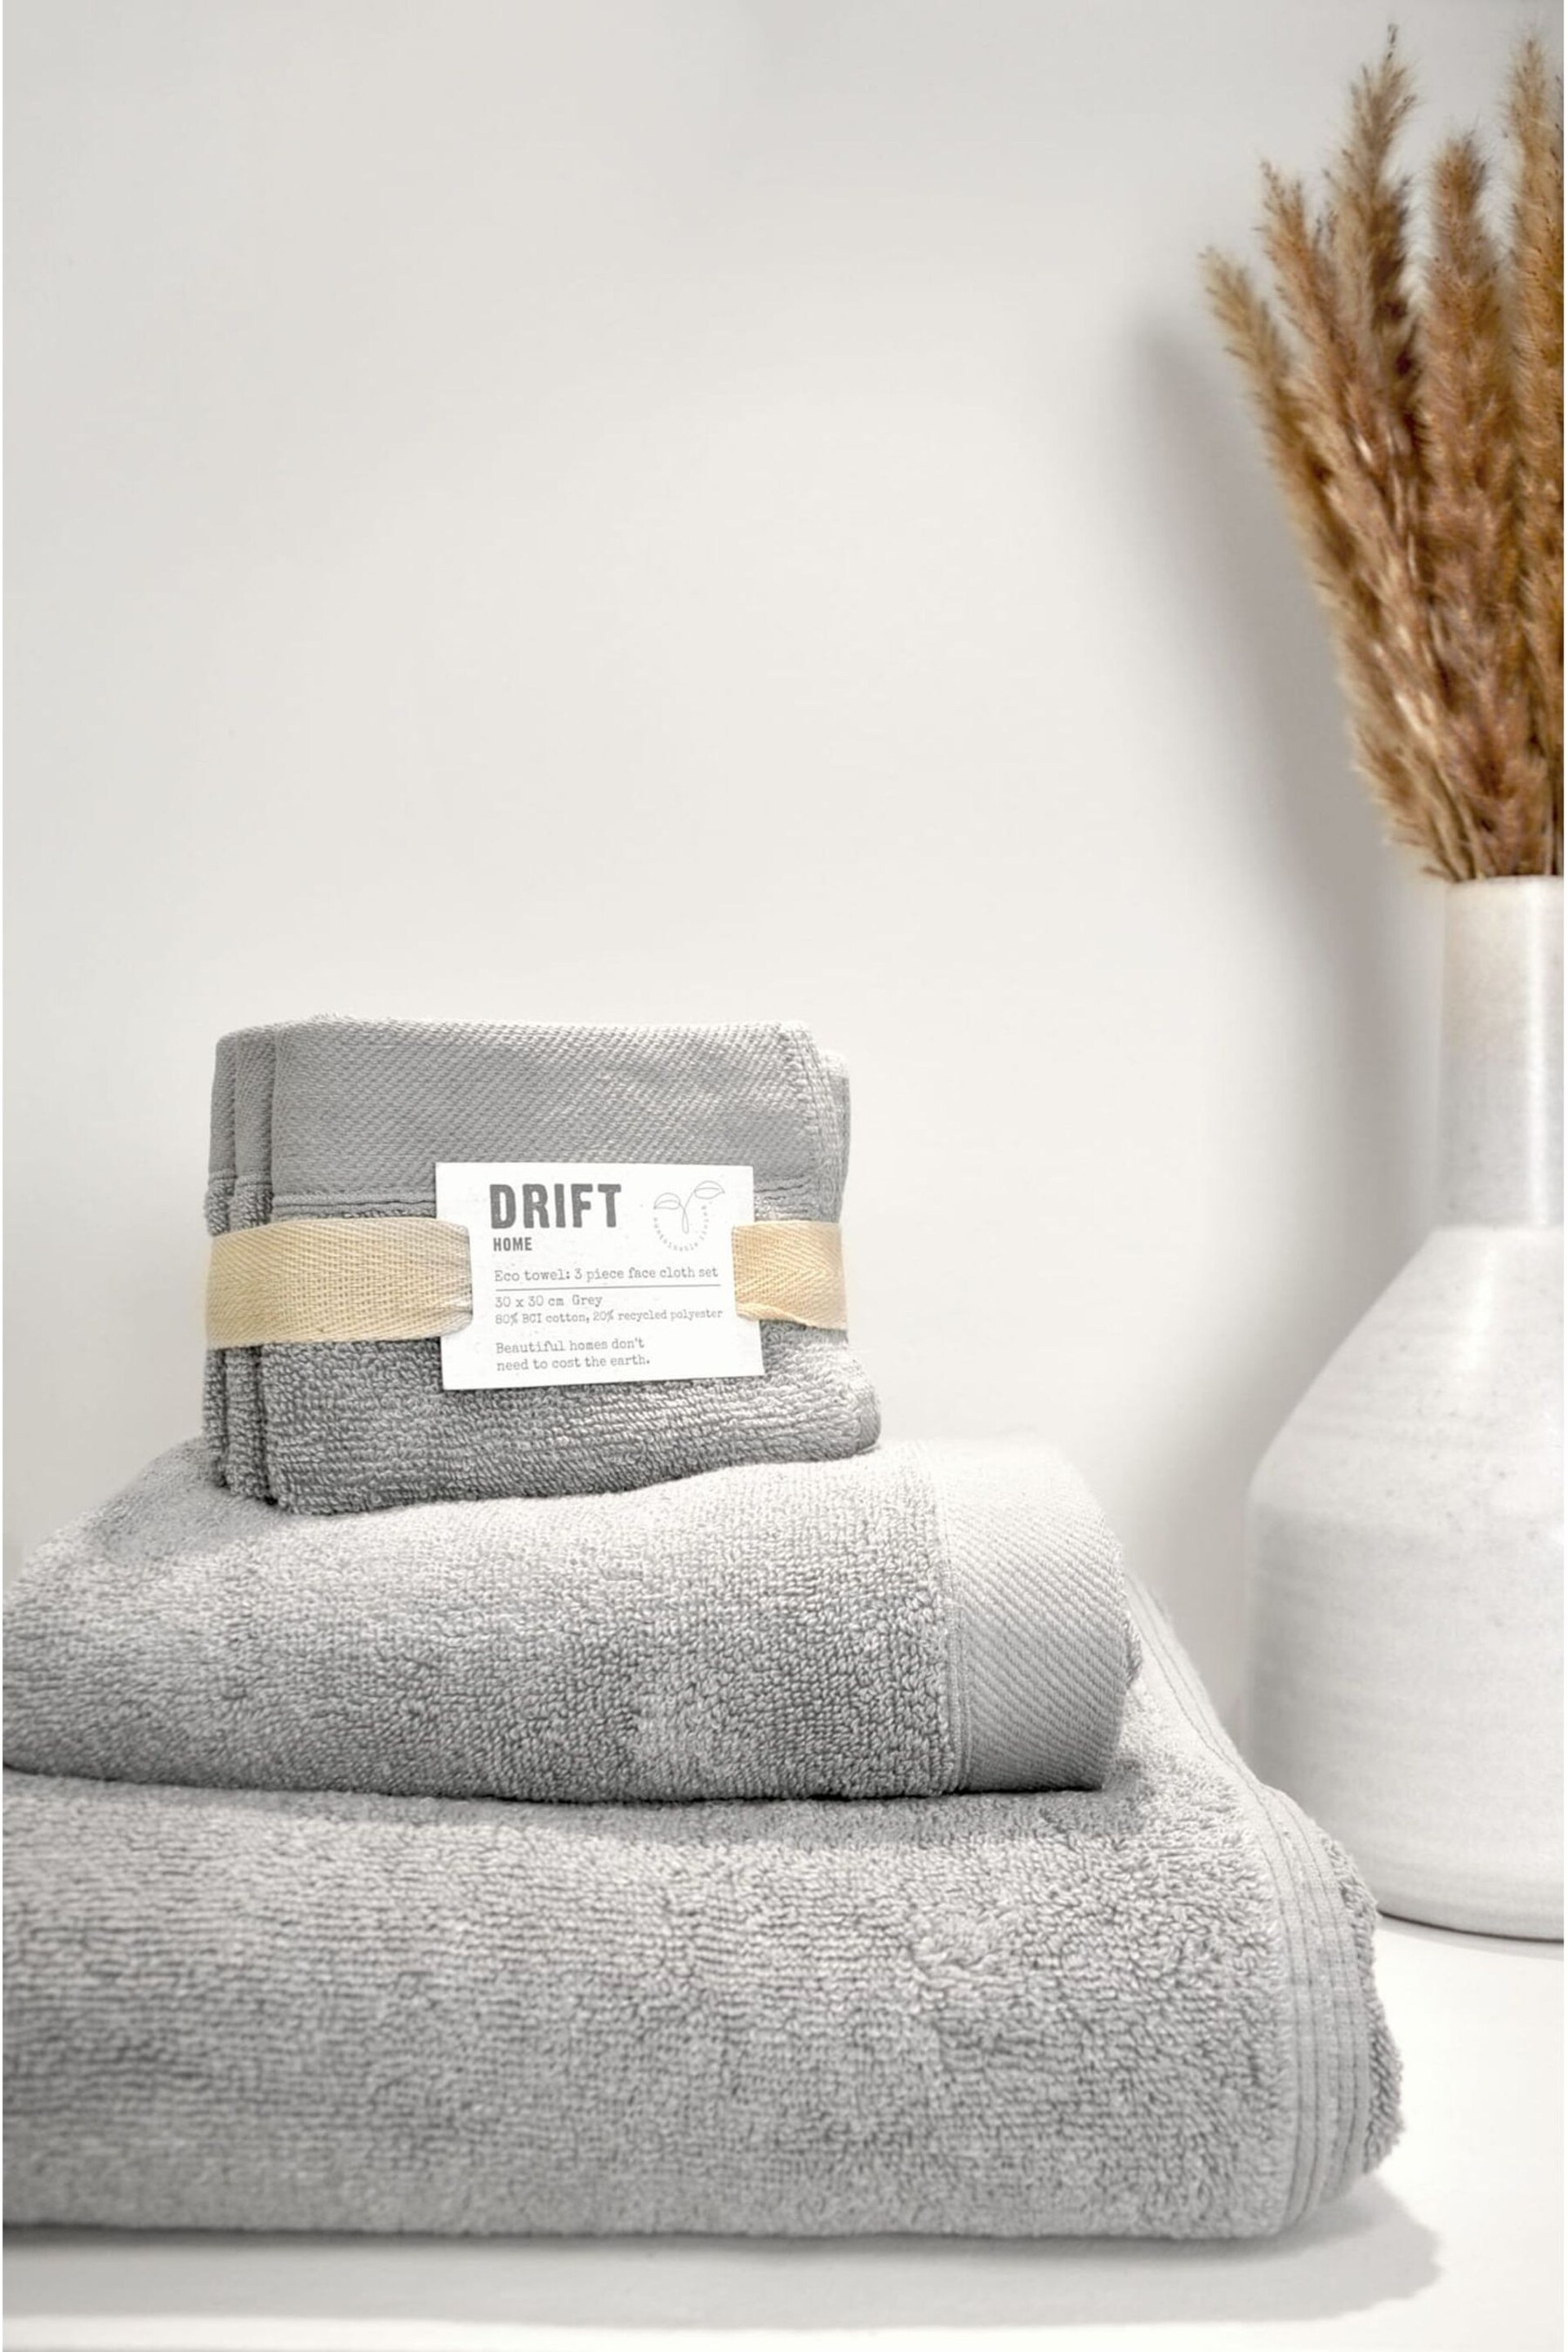 Drift Home Grey Abode Eco Towel - Image 6 of 6